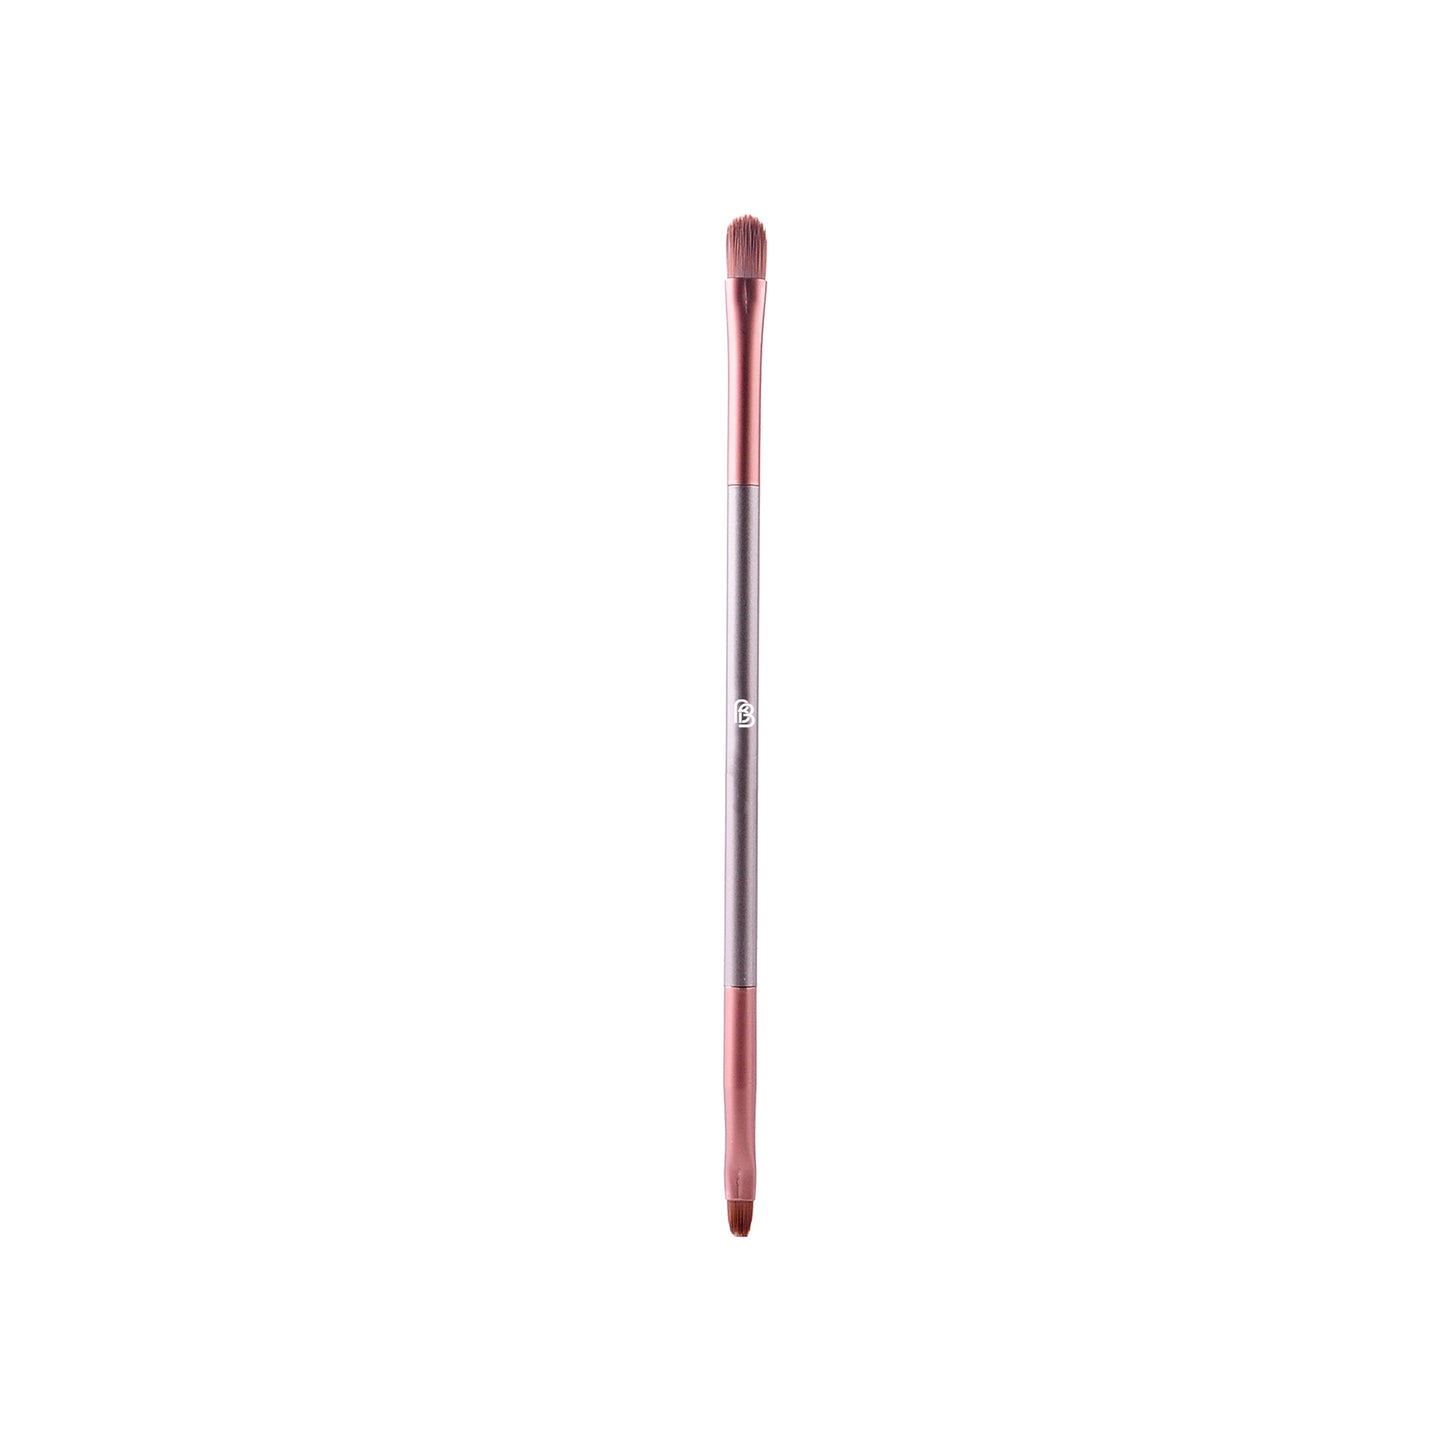 photo of a synthetic cruelty free make up brush in brown, copper and taupe colours. The brush has bristles on both ends. one is a fuller rounder shape for applying lip colour in the centre of the lips or to top up your lipstick throughout the day. The other end is smaller and more compact with a slightly less rounded shape which is good for lipstick touch ups or lining the lips with colour before a full application